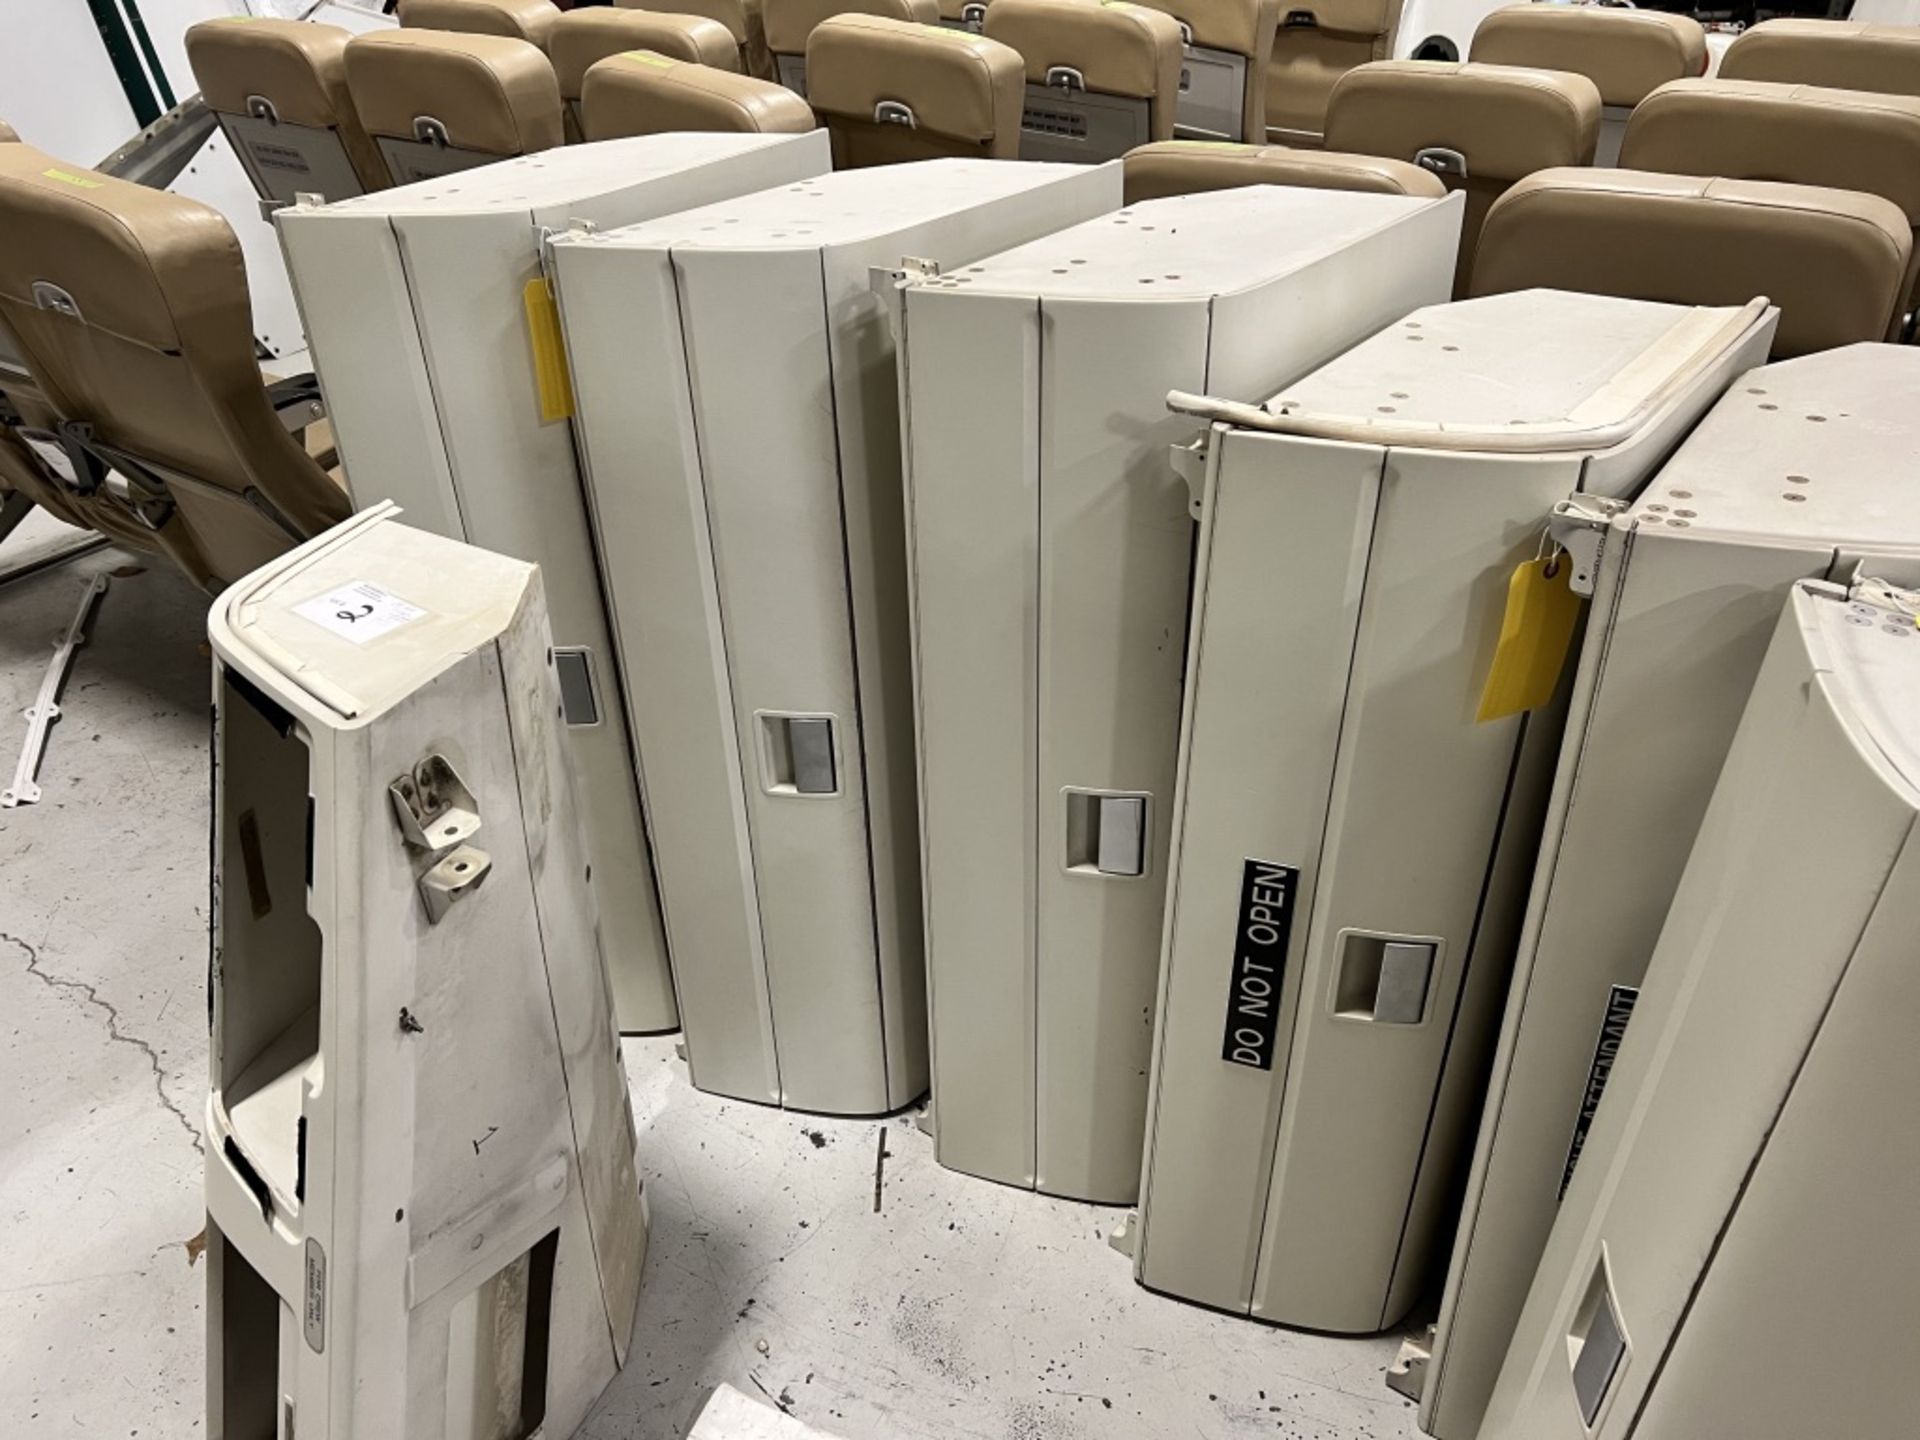 LOT OF: (30) SEATS, (1) FLIGHT ATTENDANT SEAT/ JUMP SEAT, (7) OVERHEAD LUGGAGE COMPARTMENTS AND (1) - Image 15 of 21